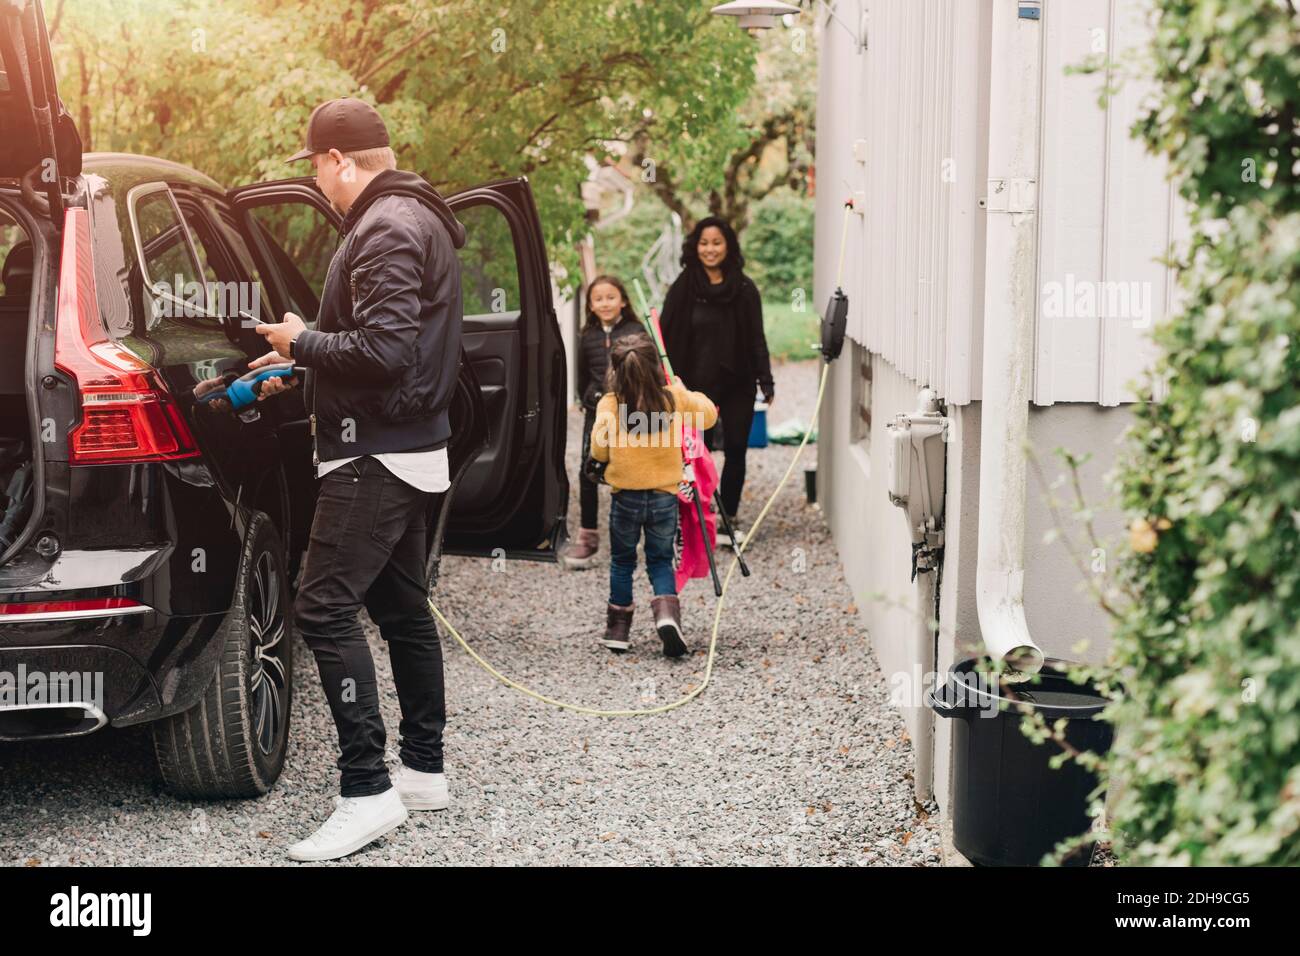 Man charging electric car while family loading luggage Stock Photo